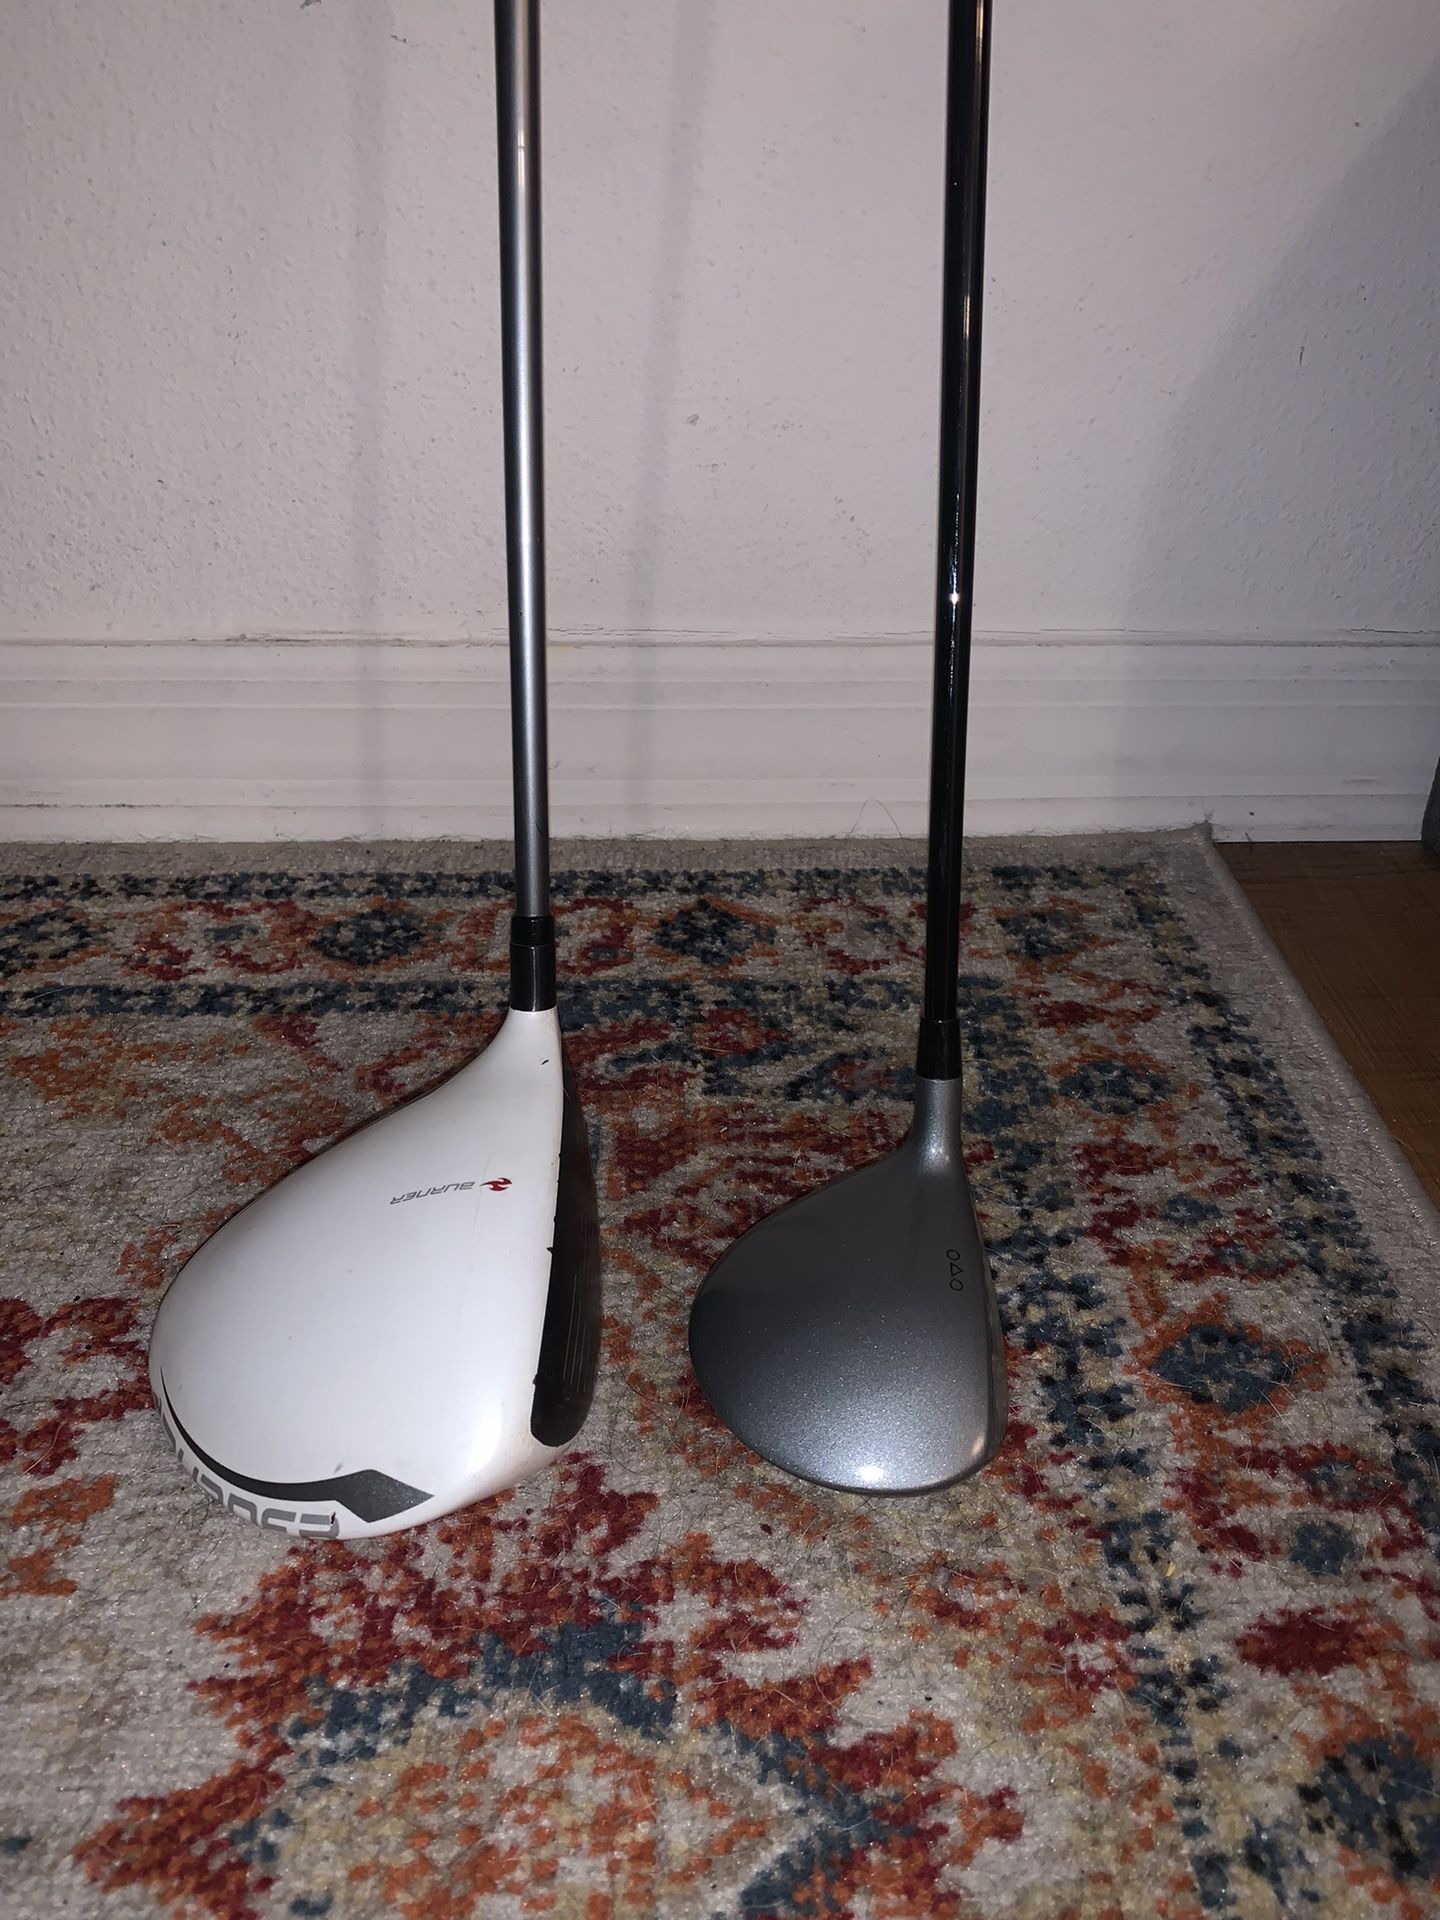 Golf Clubs (TaylorMade Driver)